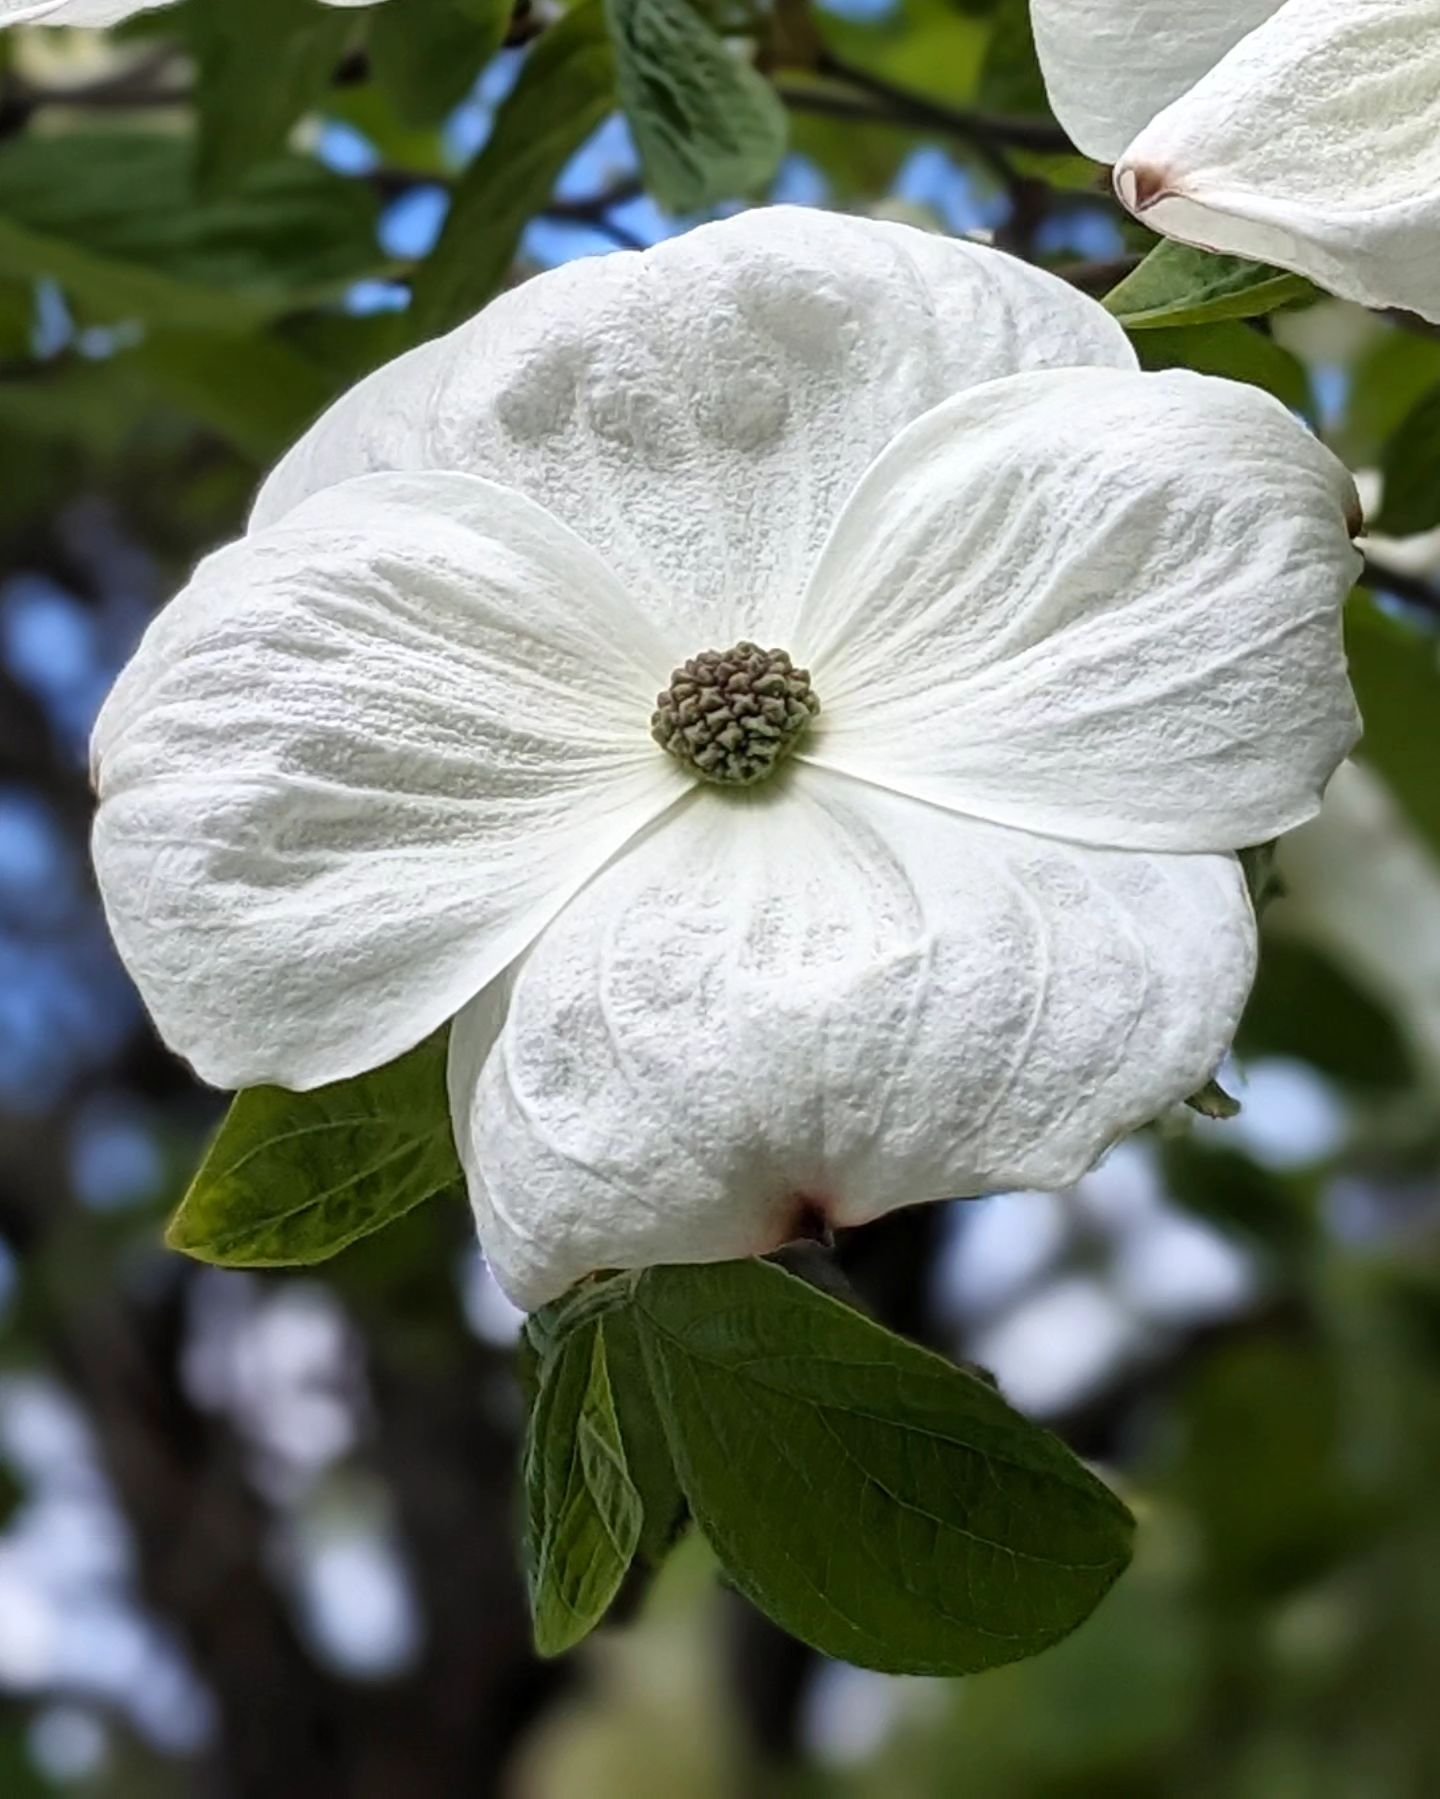 Dogwoods out